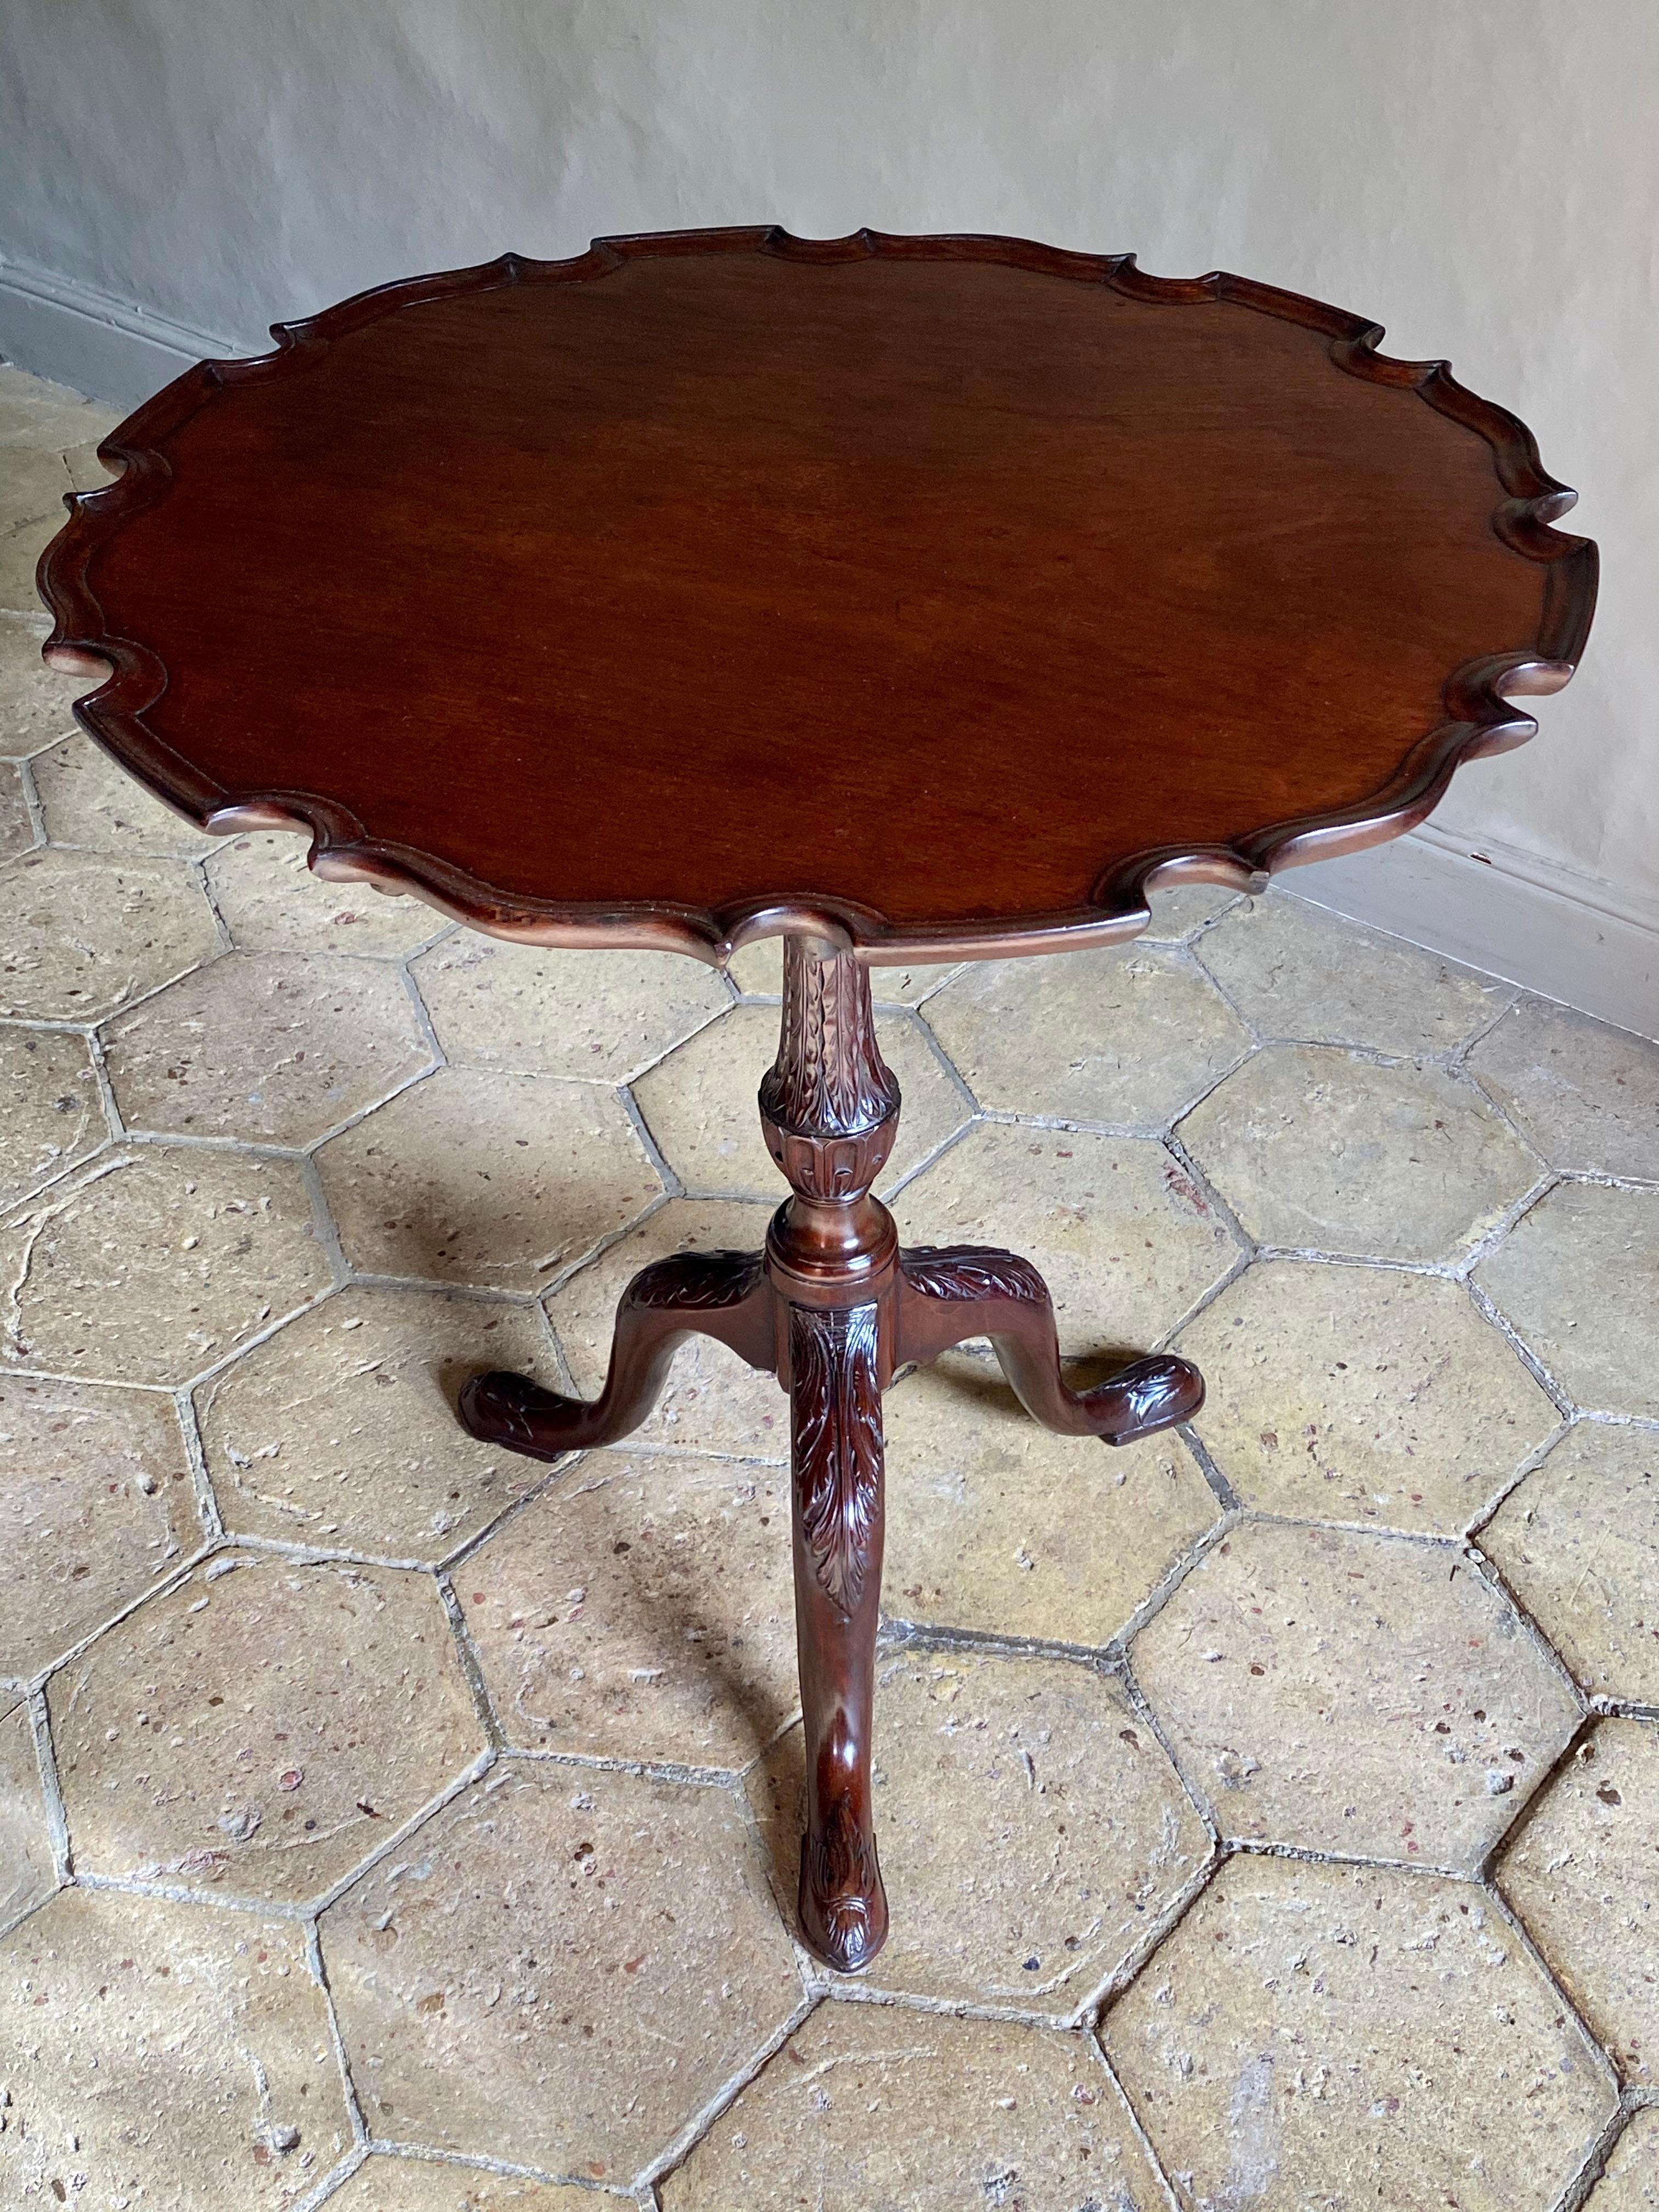 An English Chippendale period carved pie crust tripod table in mahogany of deep rich color.
George II, circa 1755.

This fine antique 18th-century table has a one-piece, well-carved top raised on a ‘bird cage’ action, allowing the top to swivel and